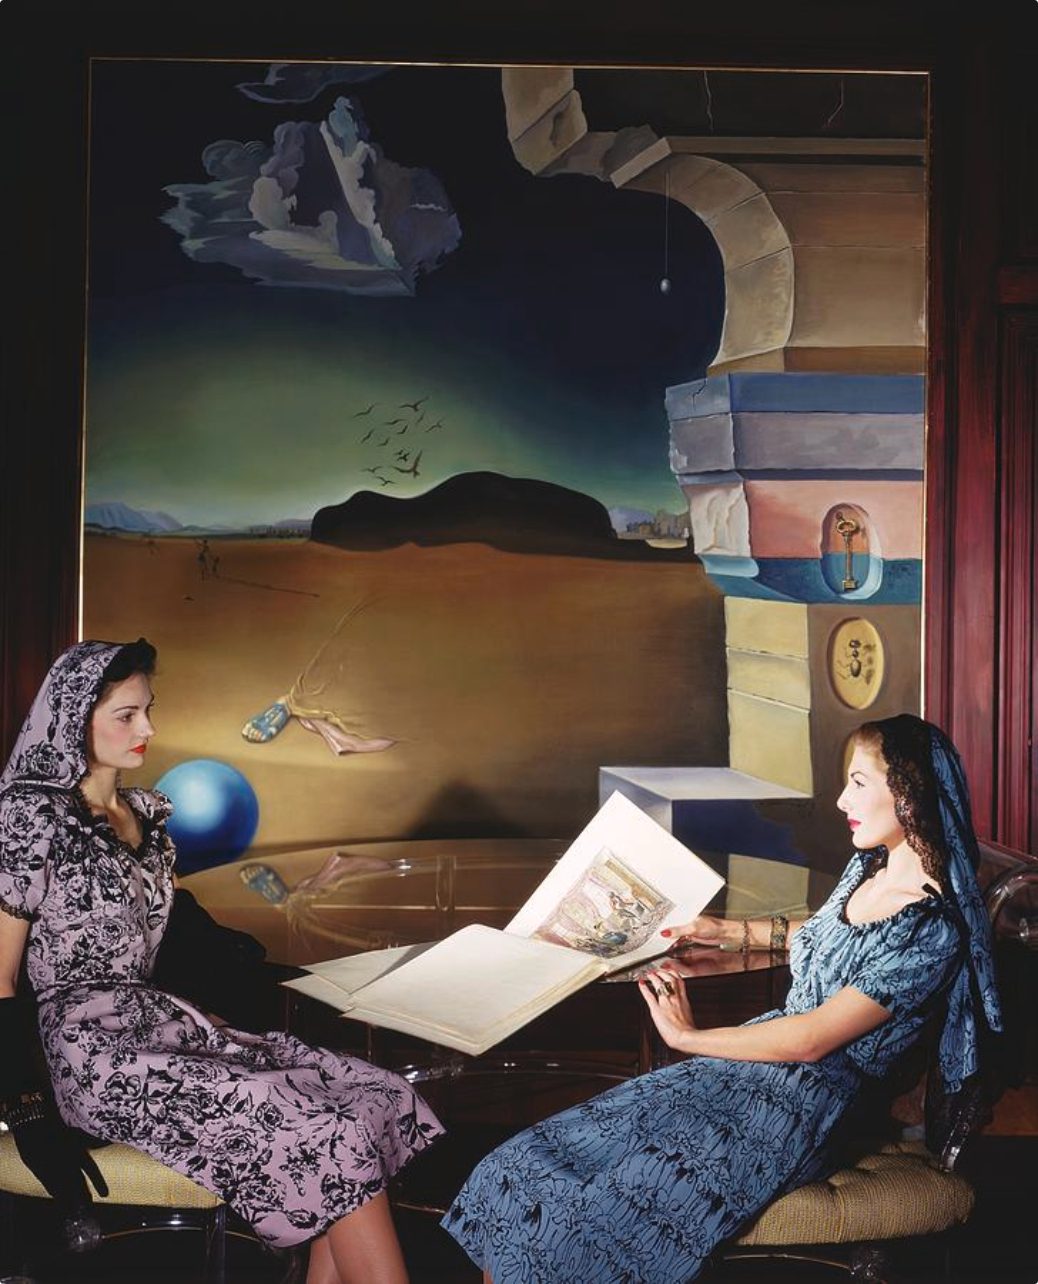 horst-p-horst_fashion-for-vogue-with-dali-mural-in-helena-rubinstein-s-apartment-nyc-1_jpeg